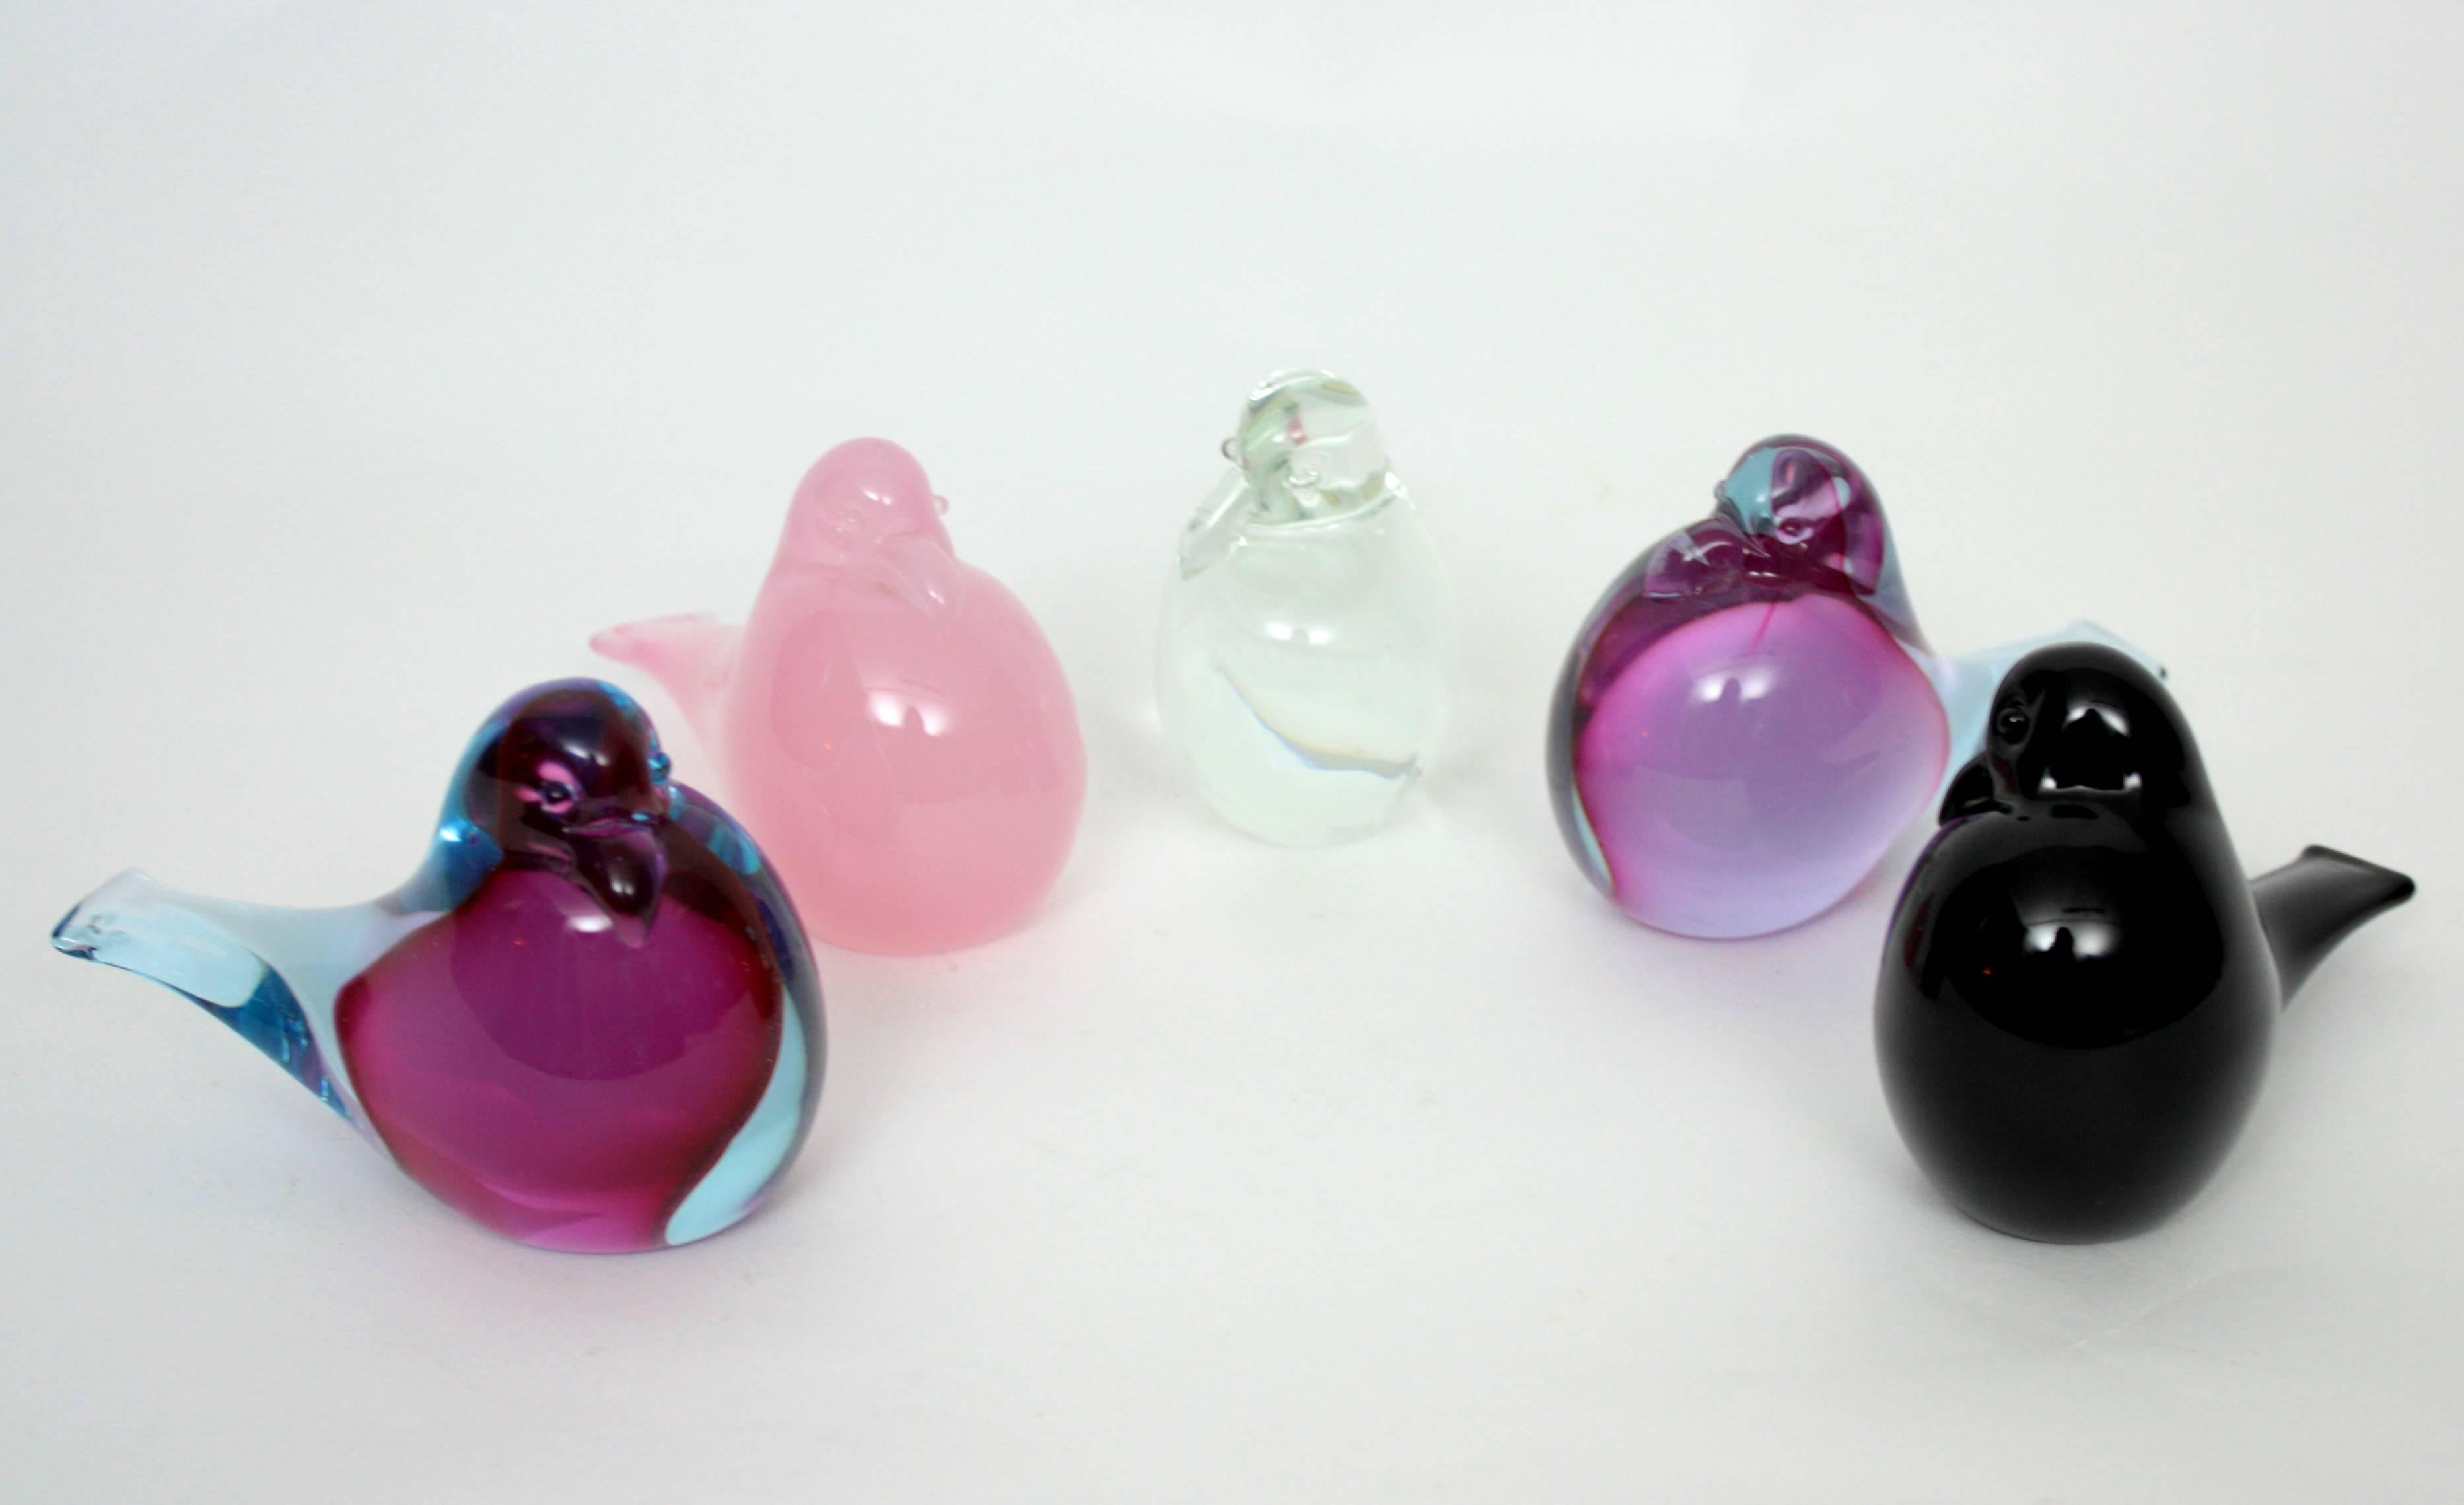 Beautiful set of five labelled Archimede Seguso Murano glass bird sculptures in different colors: One in clear glass, one in black glass, one in pink alabastro glass and two in sommerso pink-purple and clear glass.

All of them labelled and in